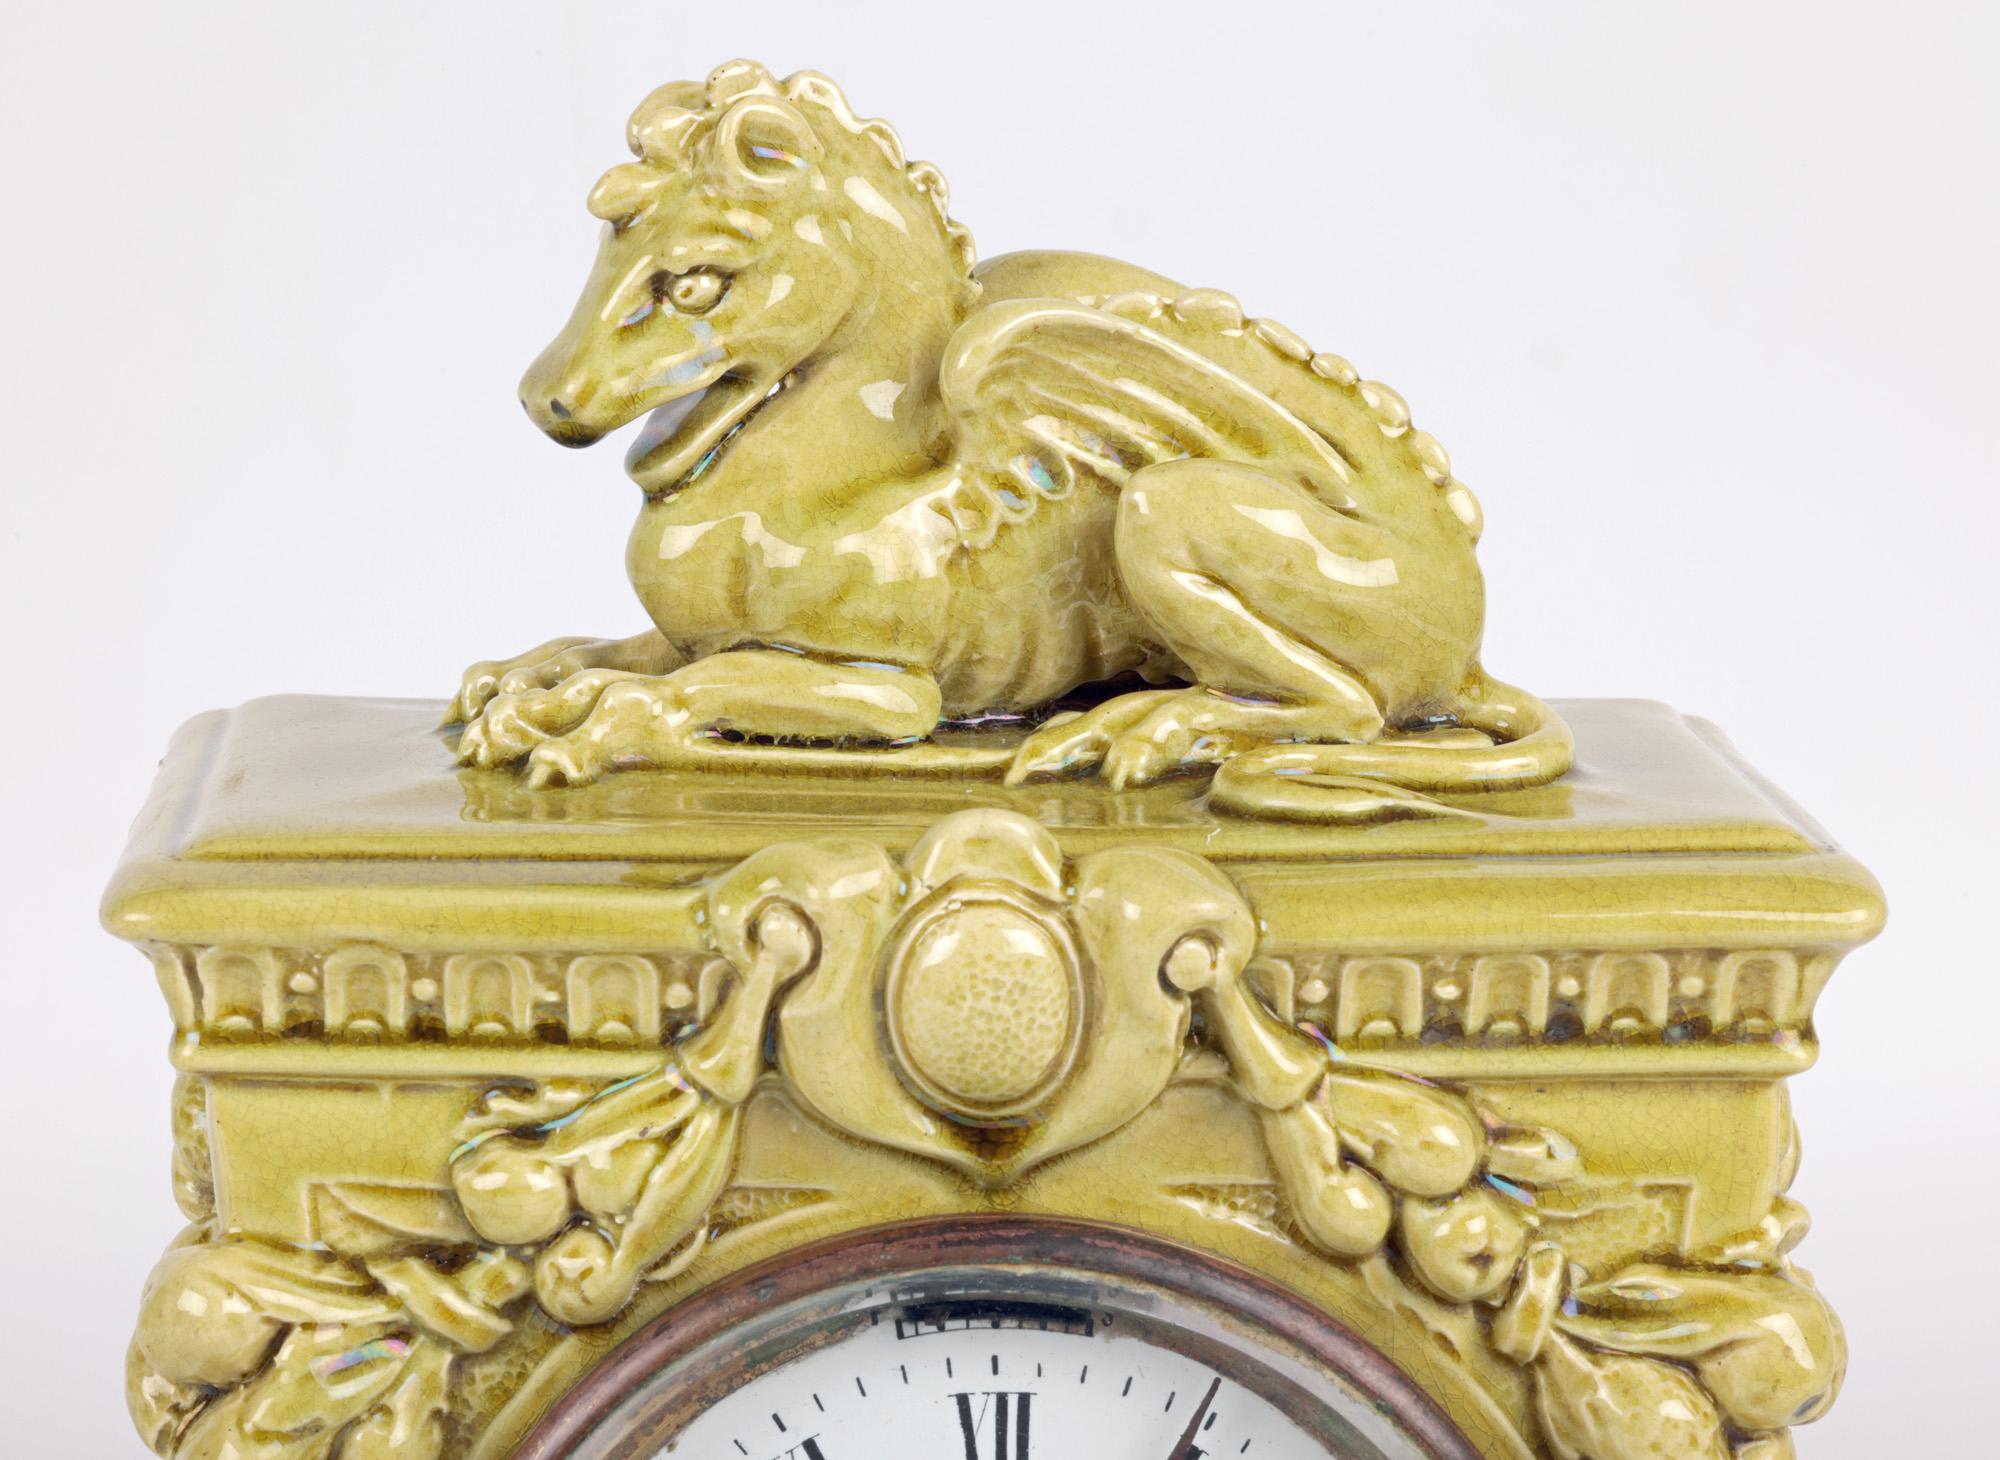 A very rare Burmantofts Faience Arts & Crafts mantel clock of flaring rectangular column shape, cast in relief with fruiting swags and winged putti masks, the top surmounted with a grotesque winged horse like creature dating from around 1890. The